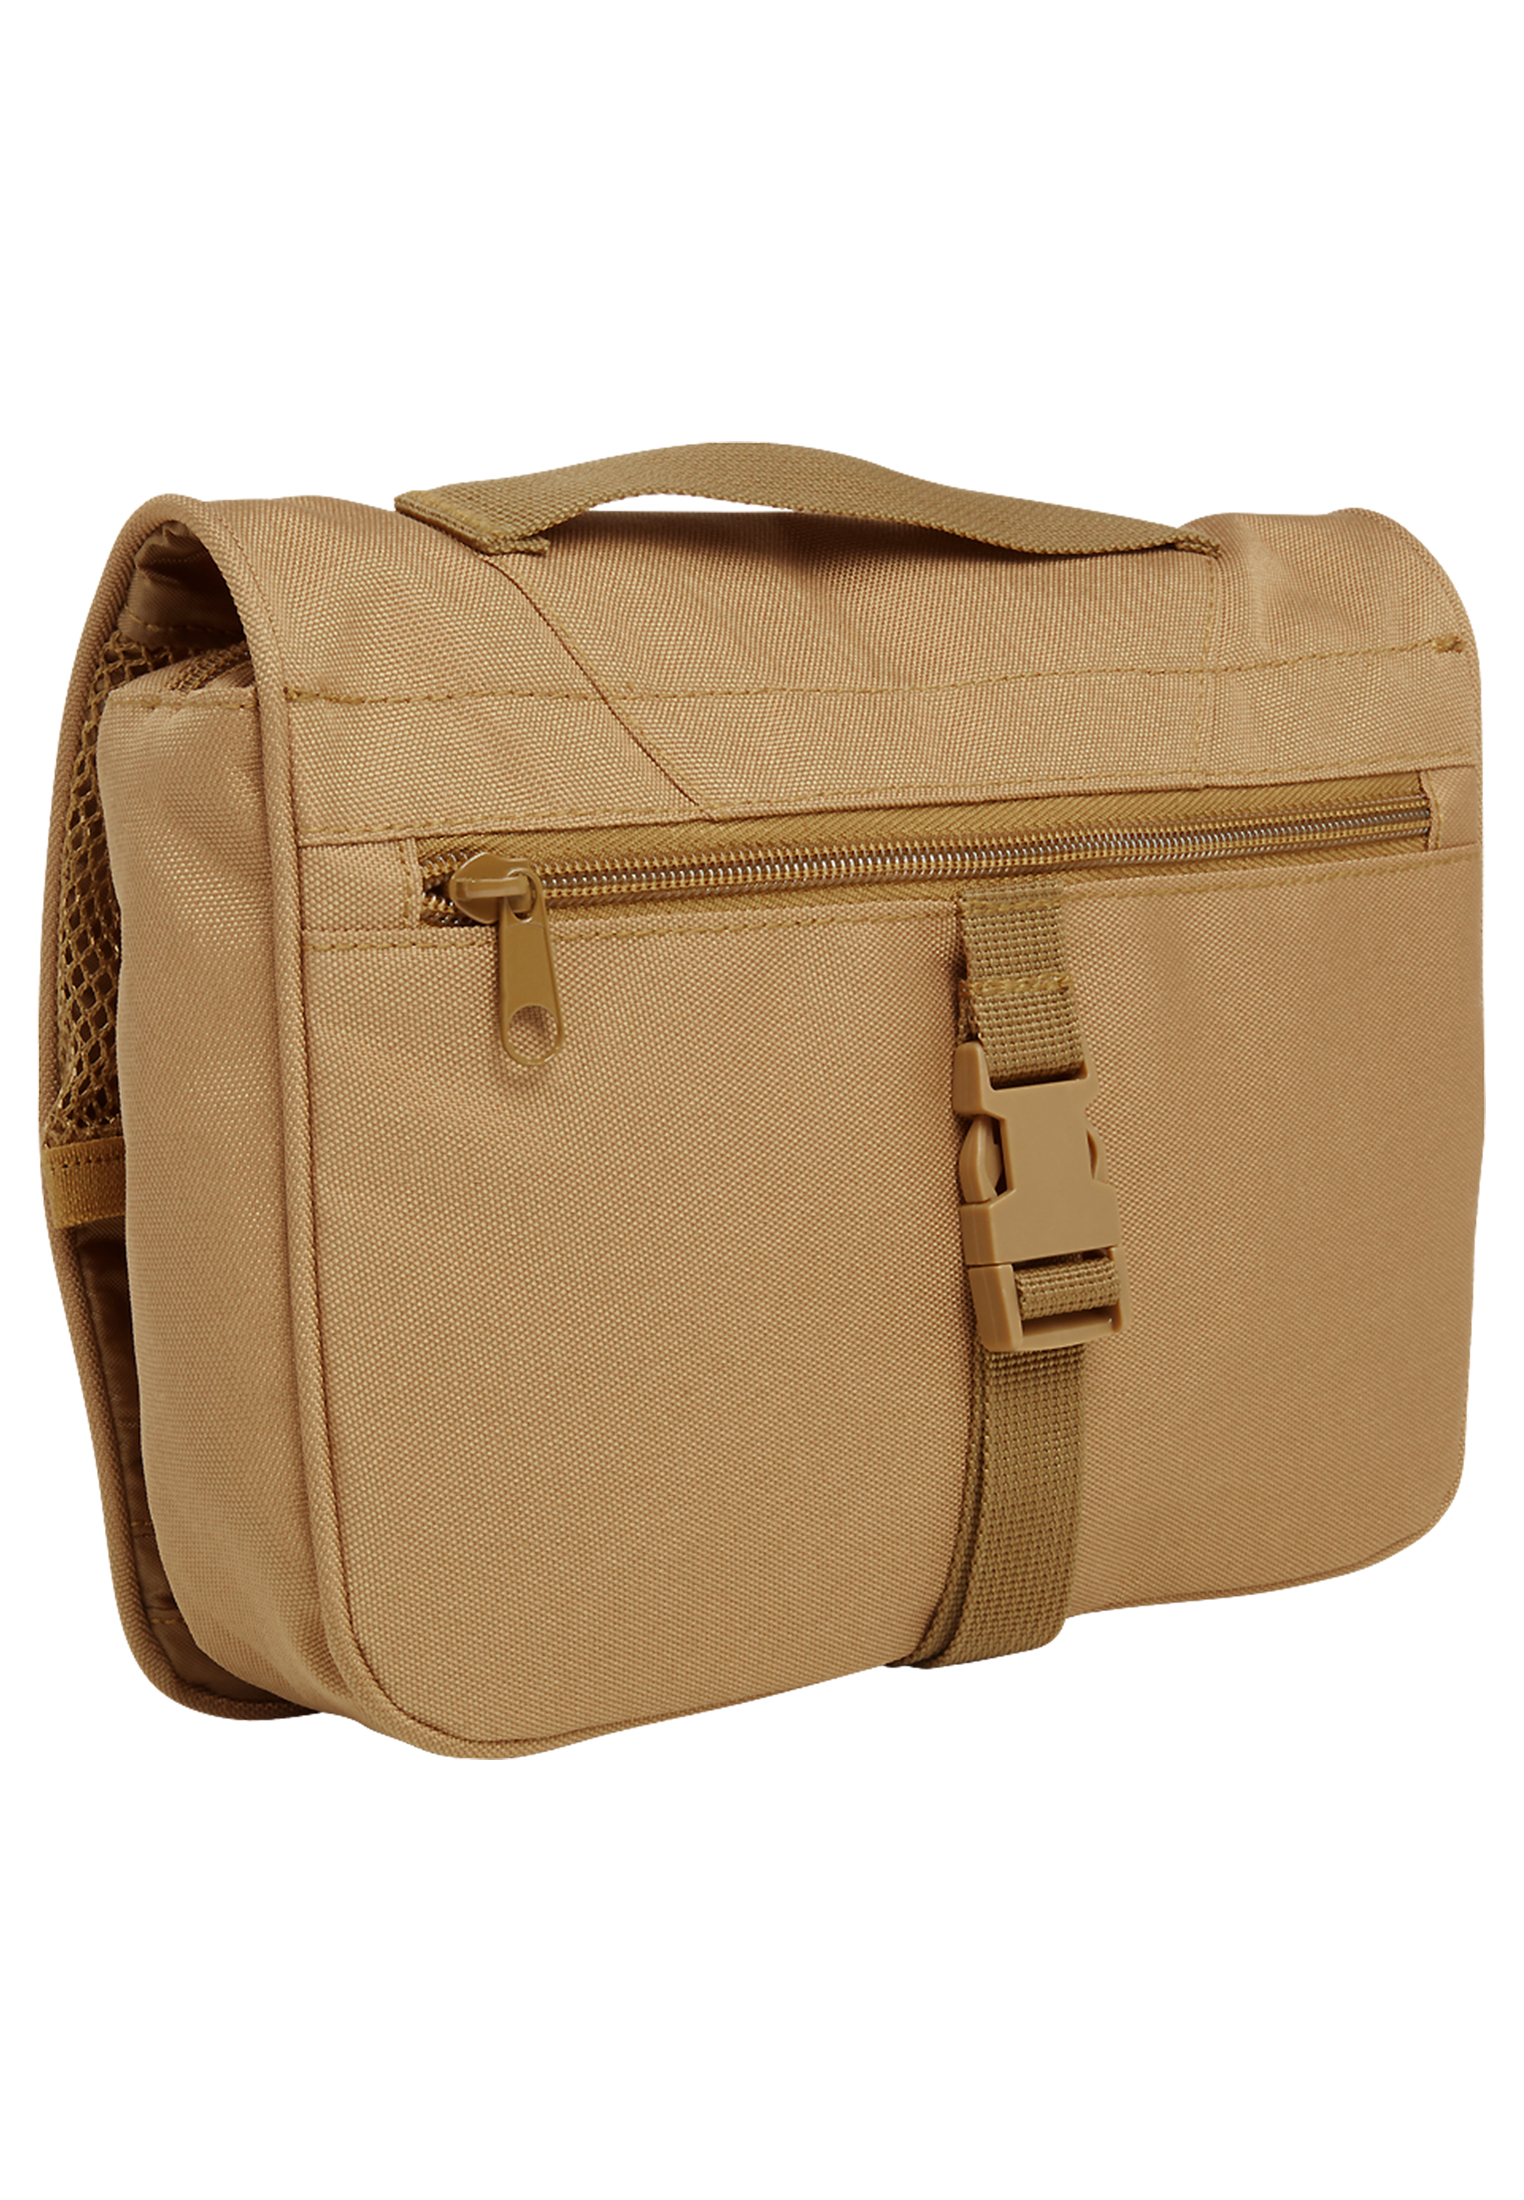 Taschen Toiletry Bag large in Farbe camel